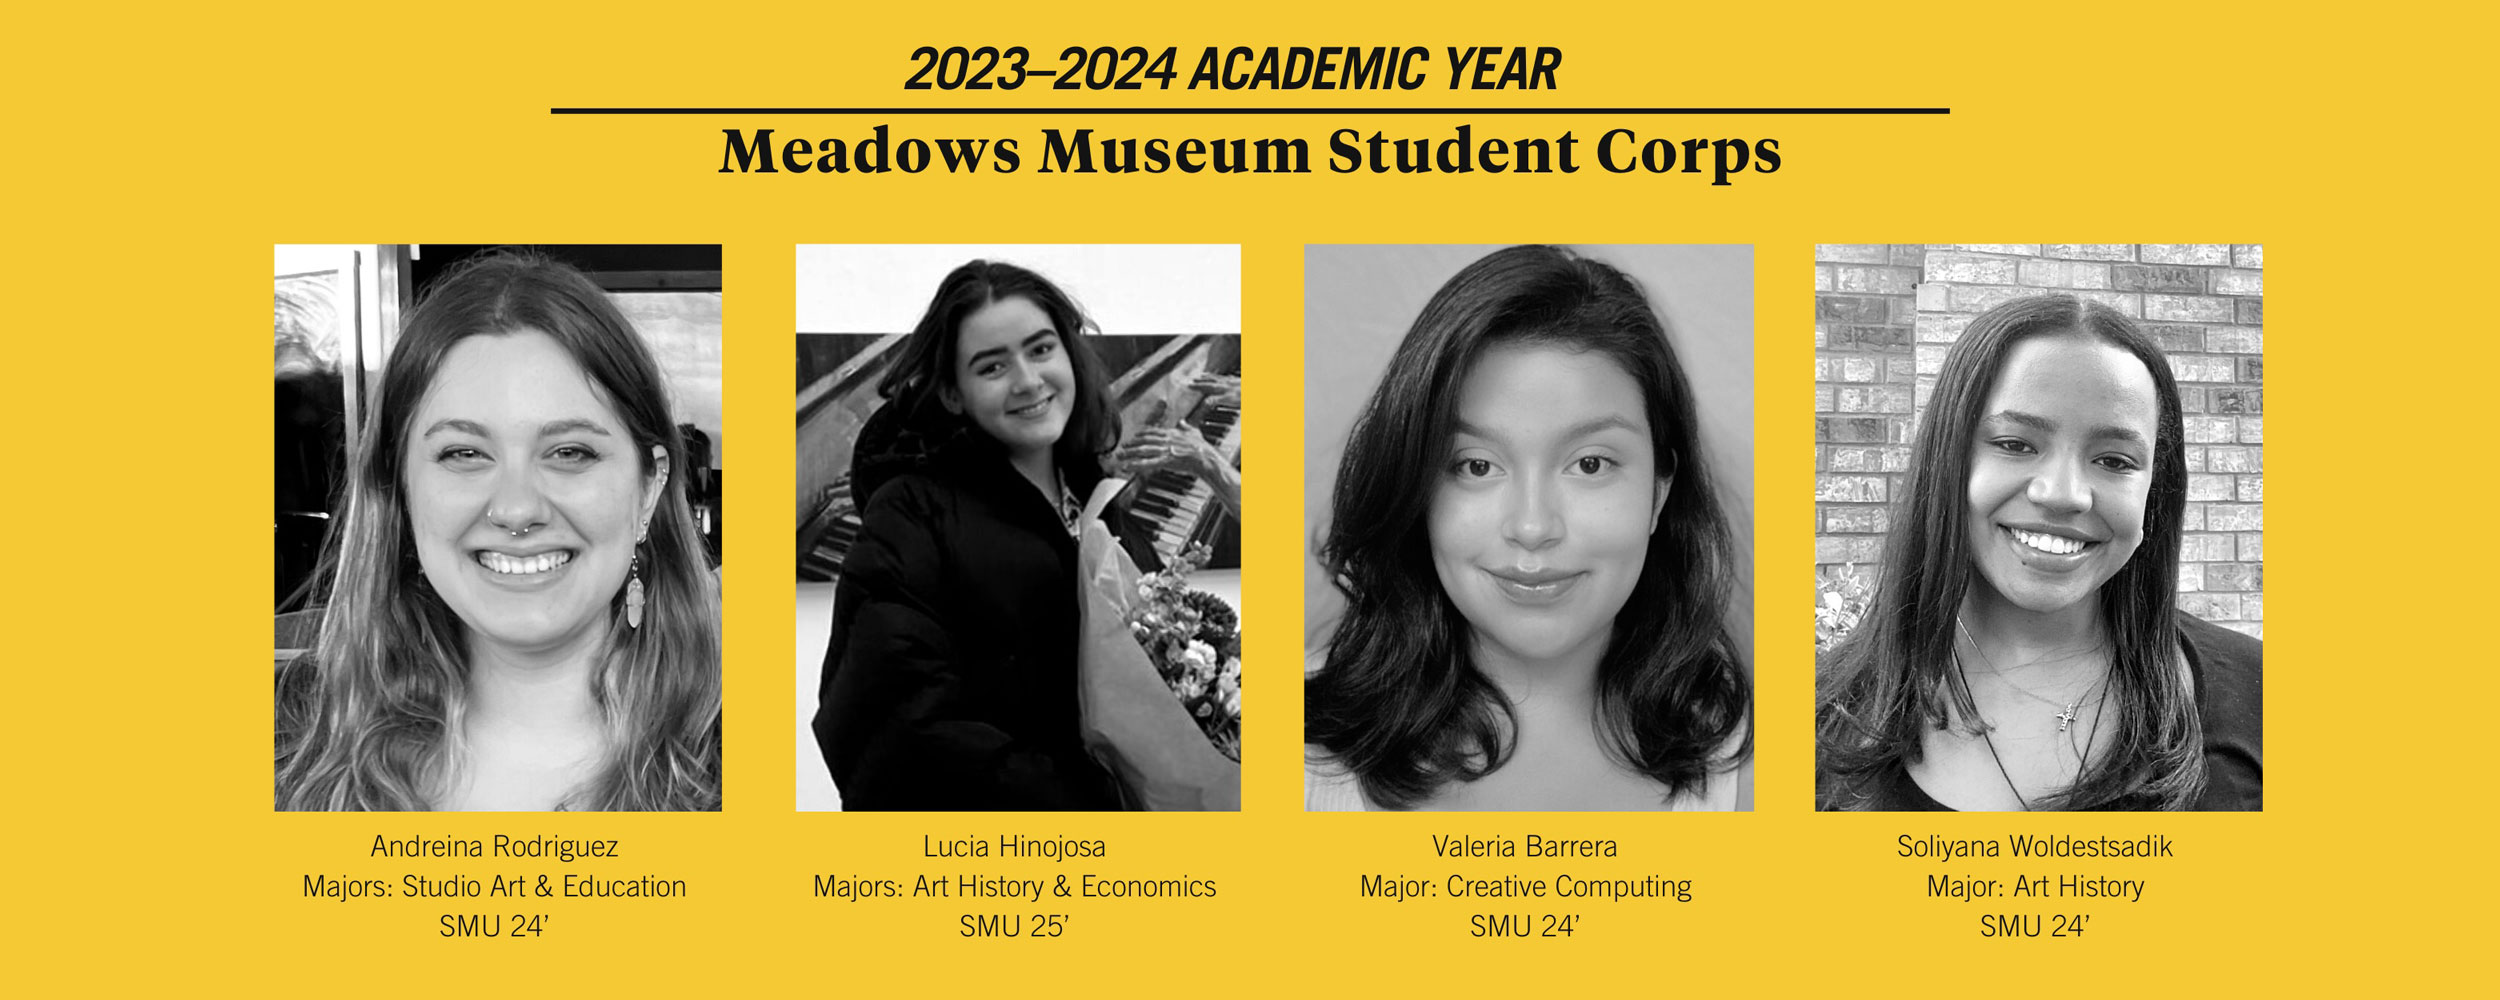 The four students selected for the 2023-24 Meadows Museum Student Corps program are Valeria Barrera, Lucia Hinojosa, Andreina Rodriguez, and Soliyana Woldestsadik.